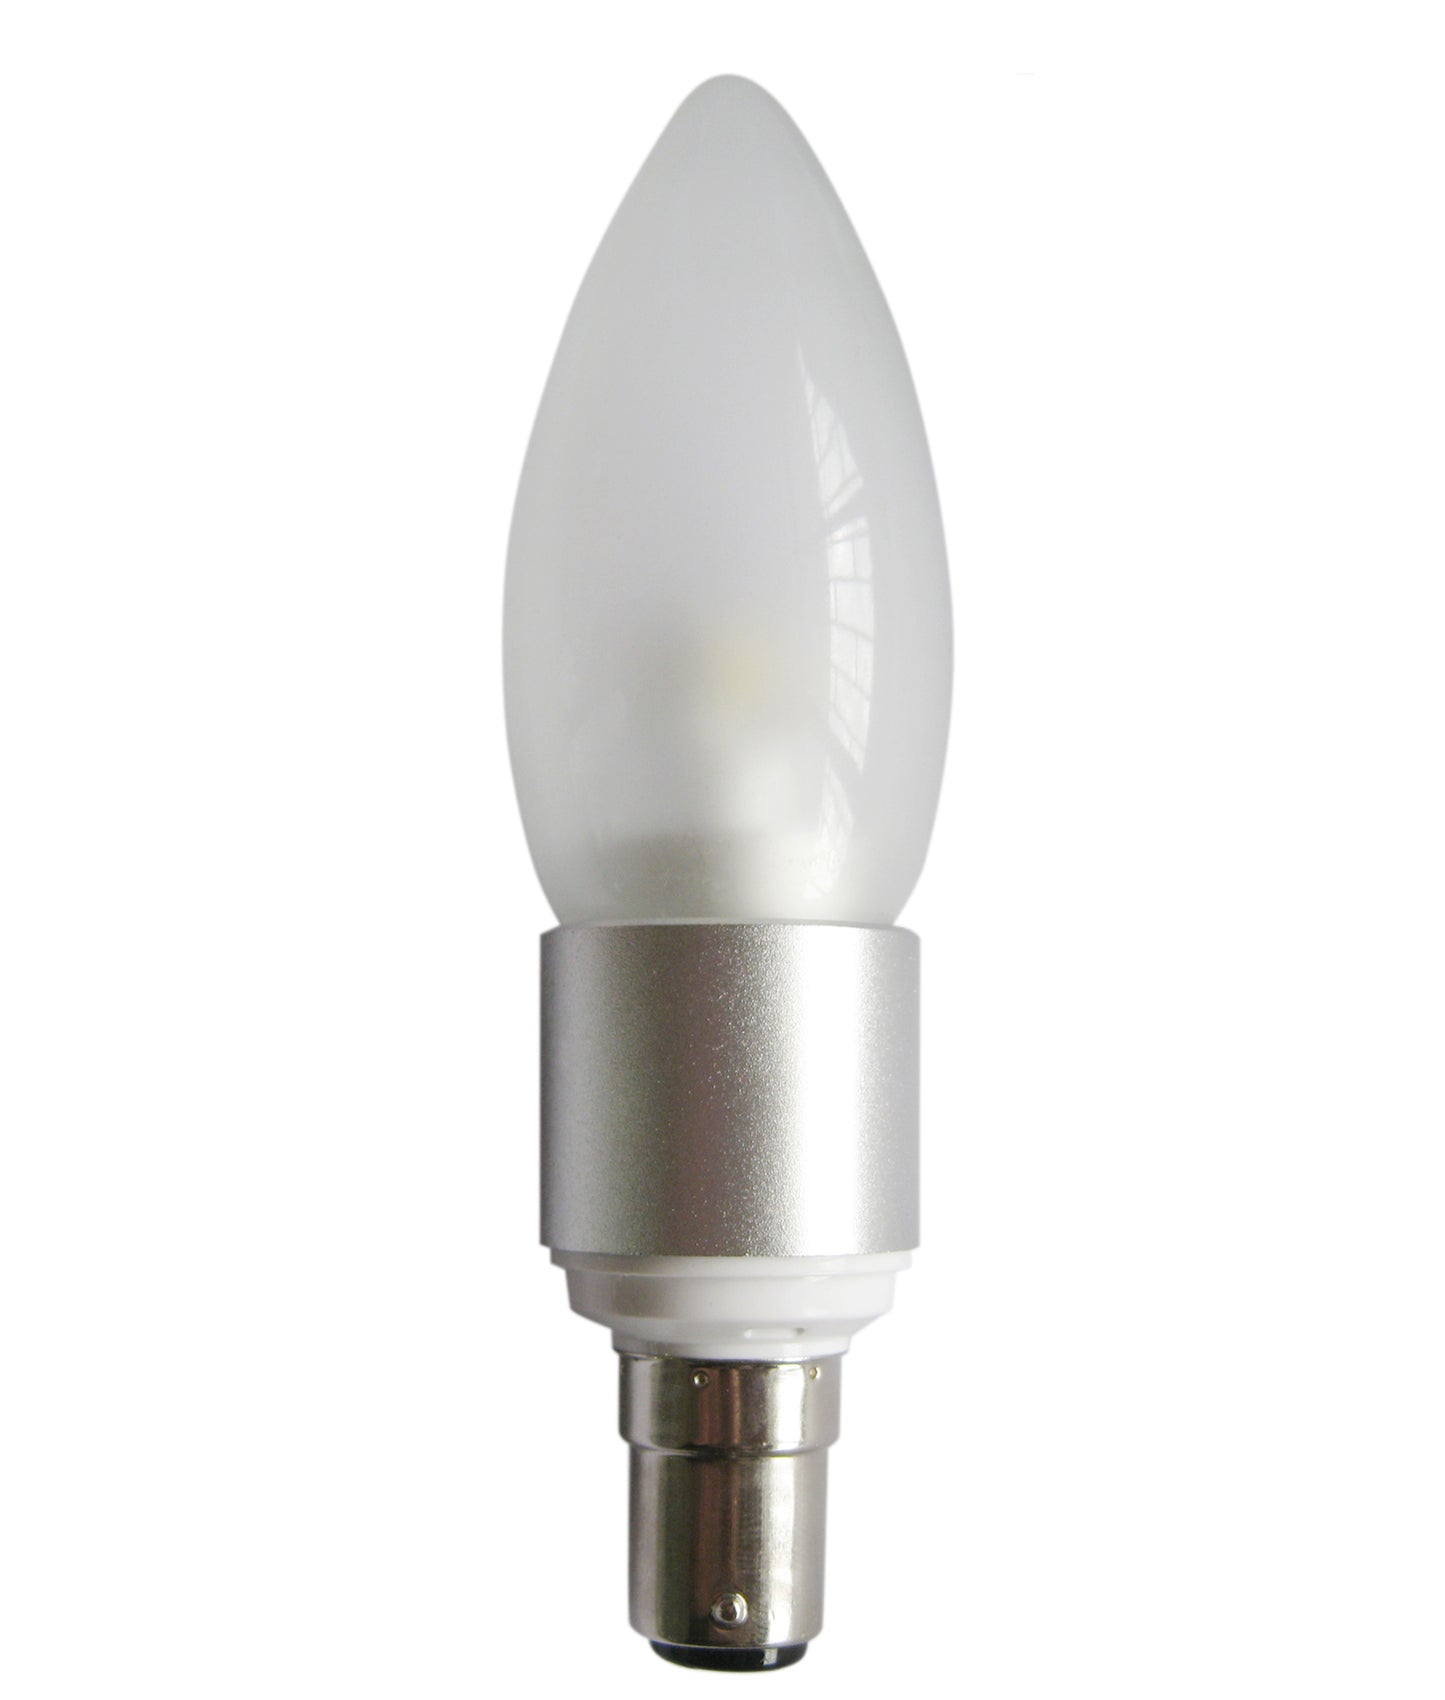 Candle LED Dimmable Globes Clear / Frosted Diffuser (4W)